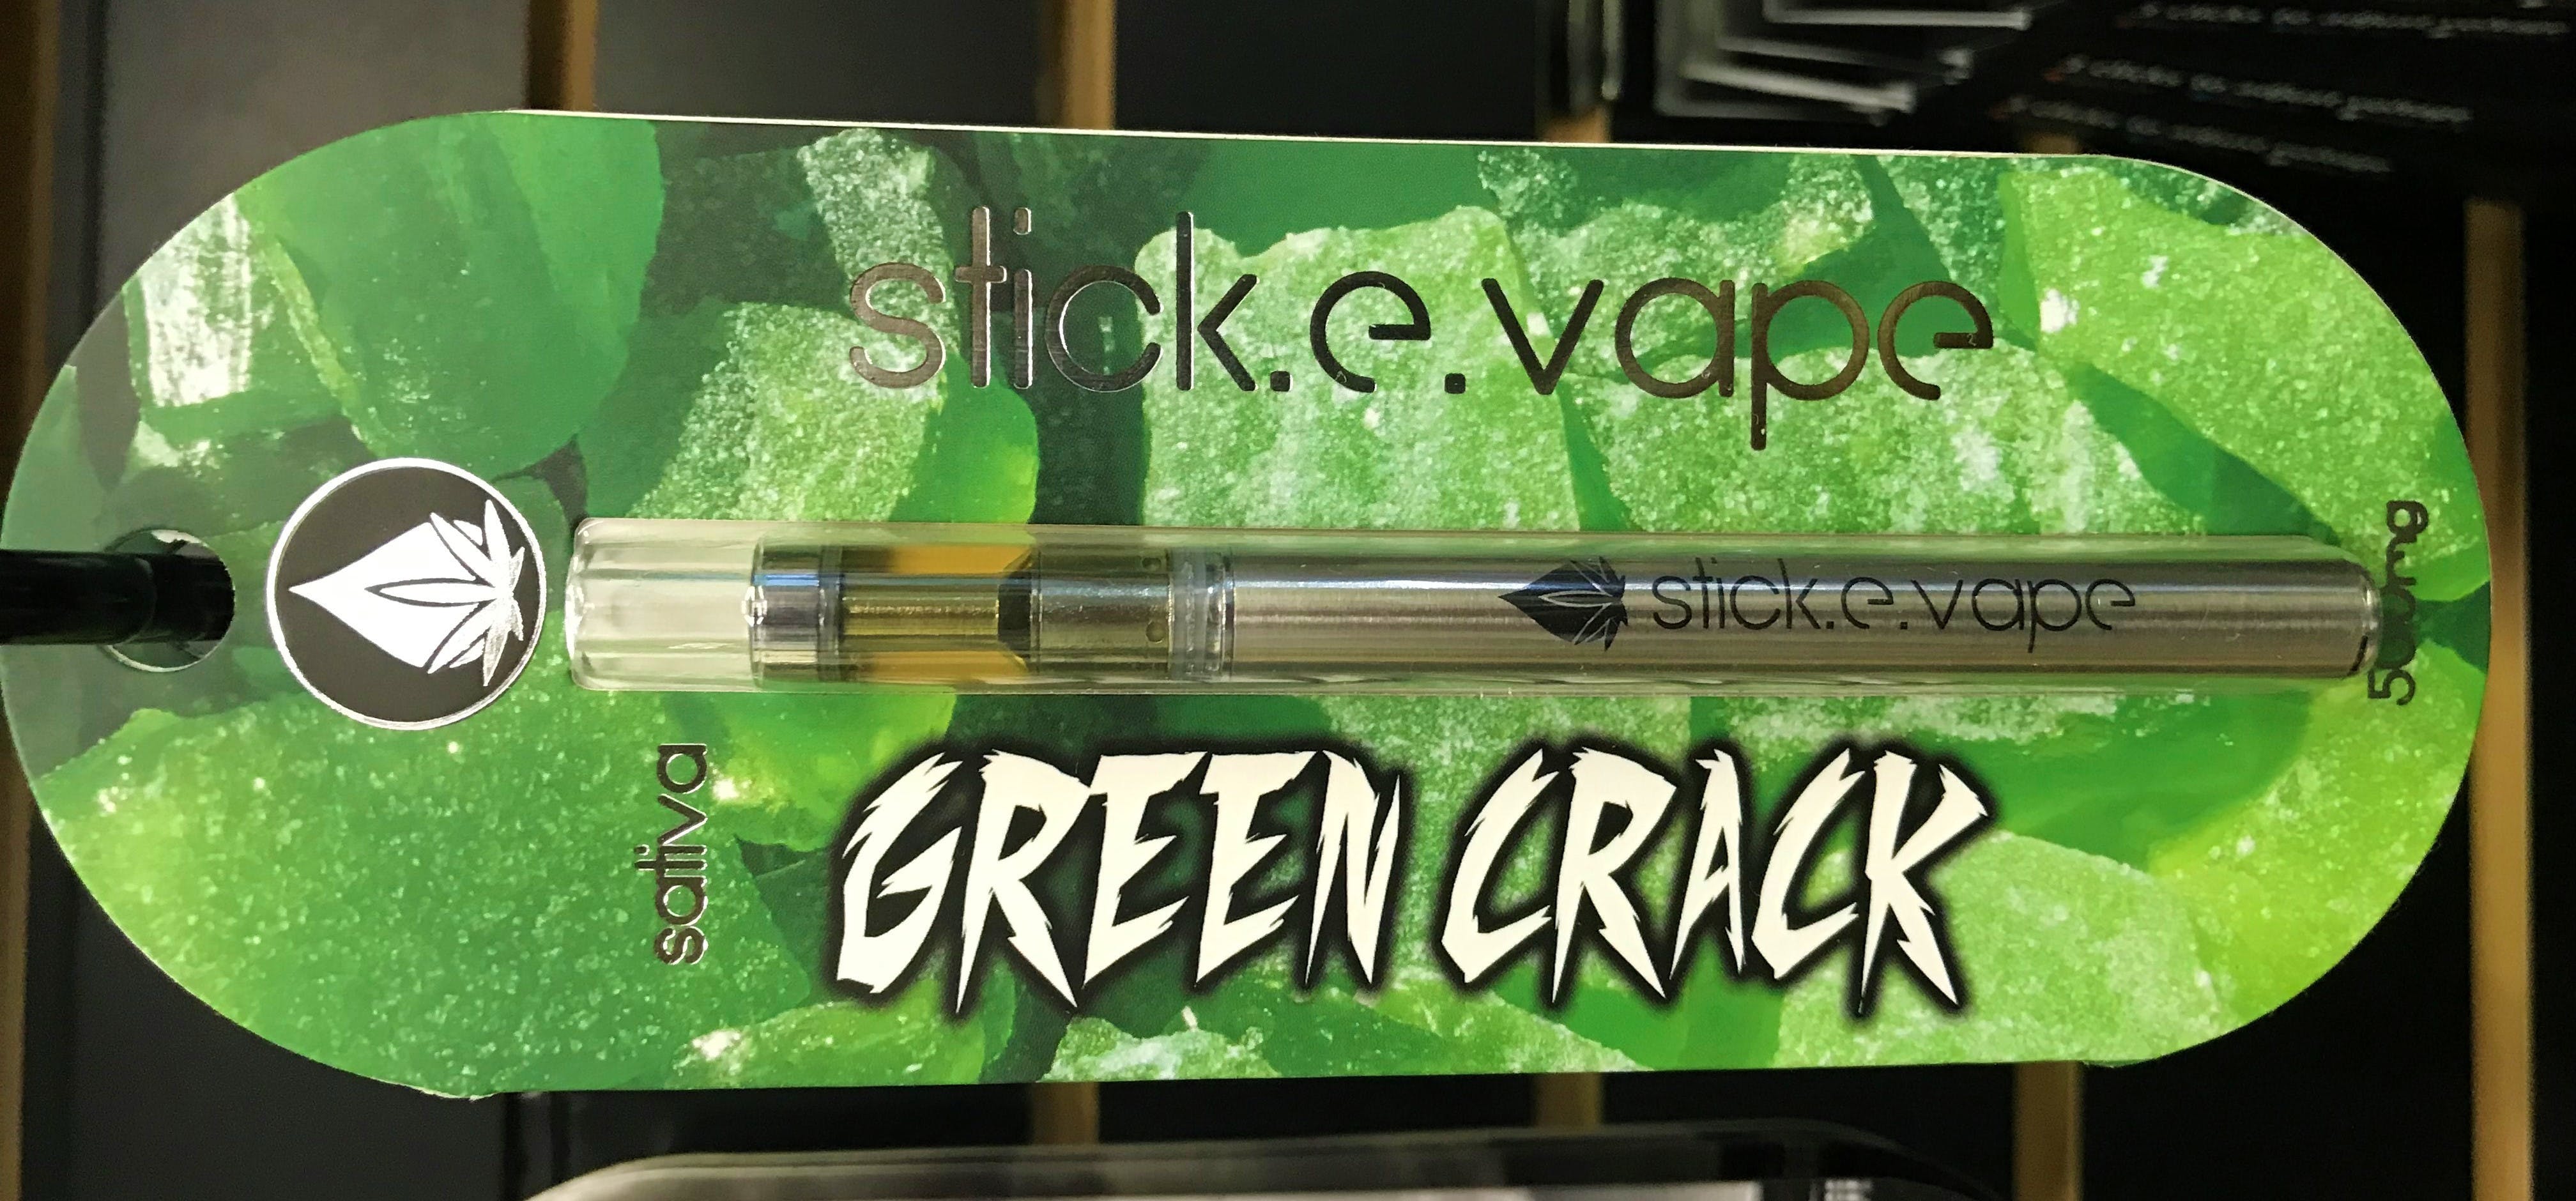 concentrate-stick-e-vape-green-crack-500mg-disposable